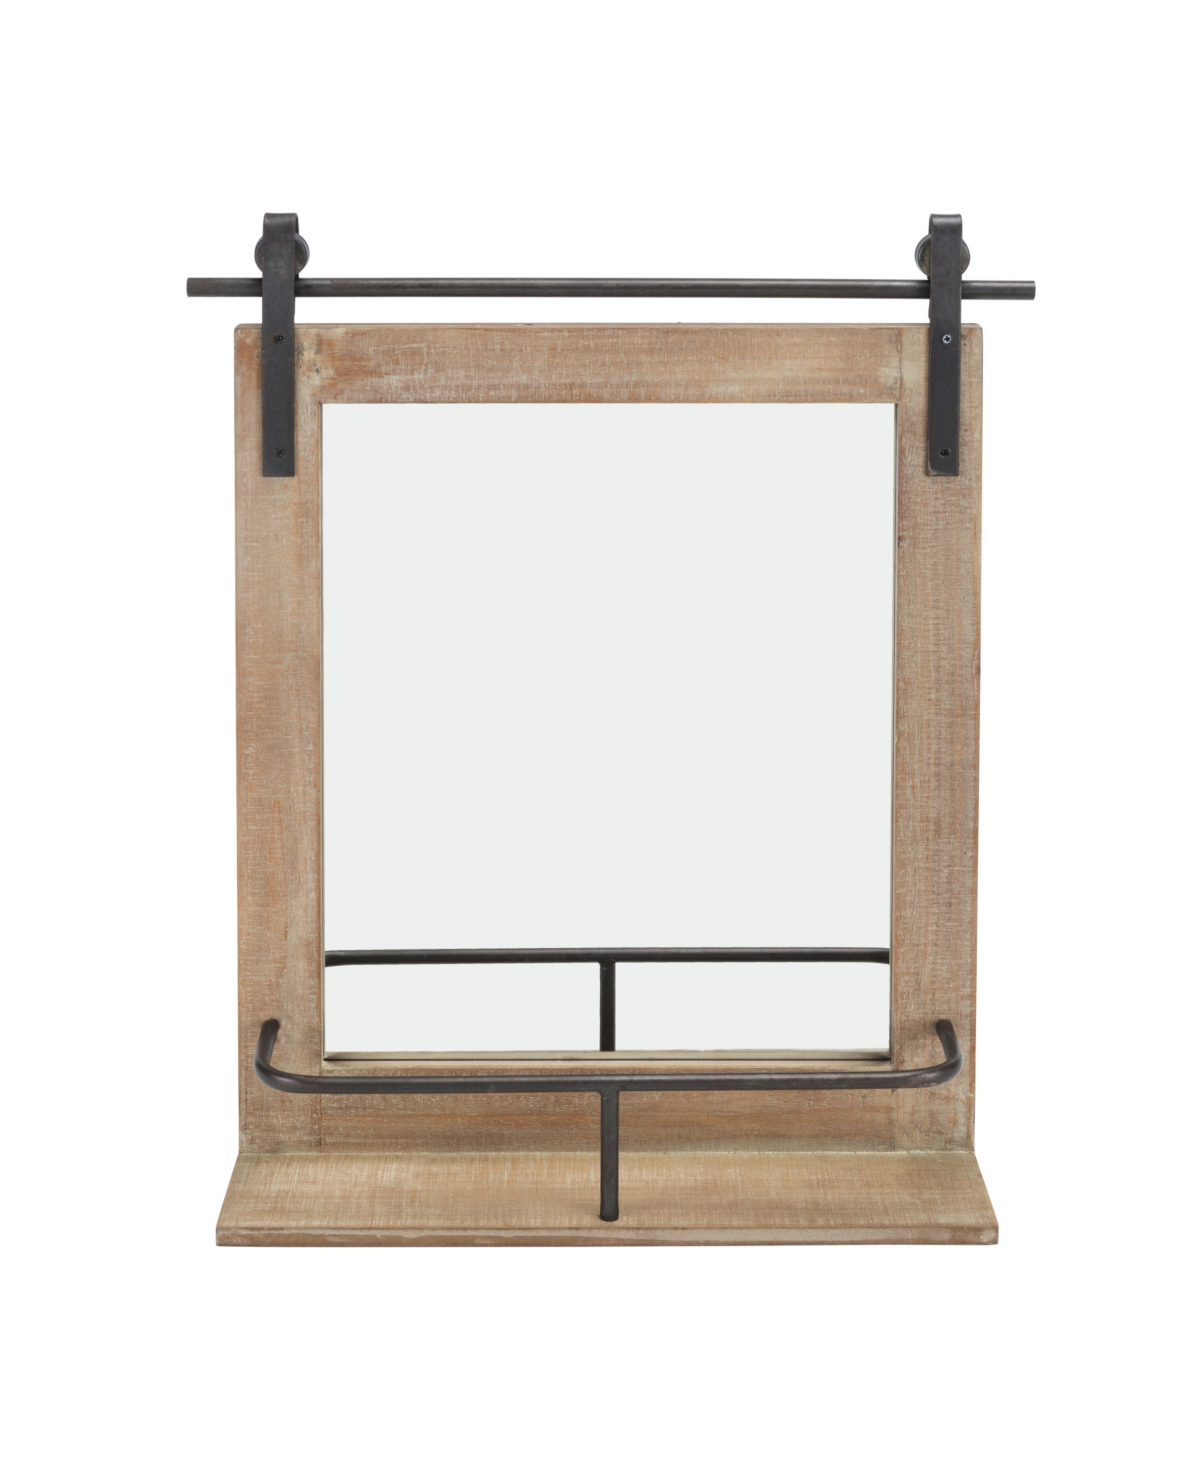 Rustic Industrial Wood-Framed Wall Mount Barn Door Vanity Mirror with Shelf and Iron Hardware - Natural